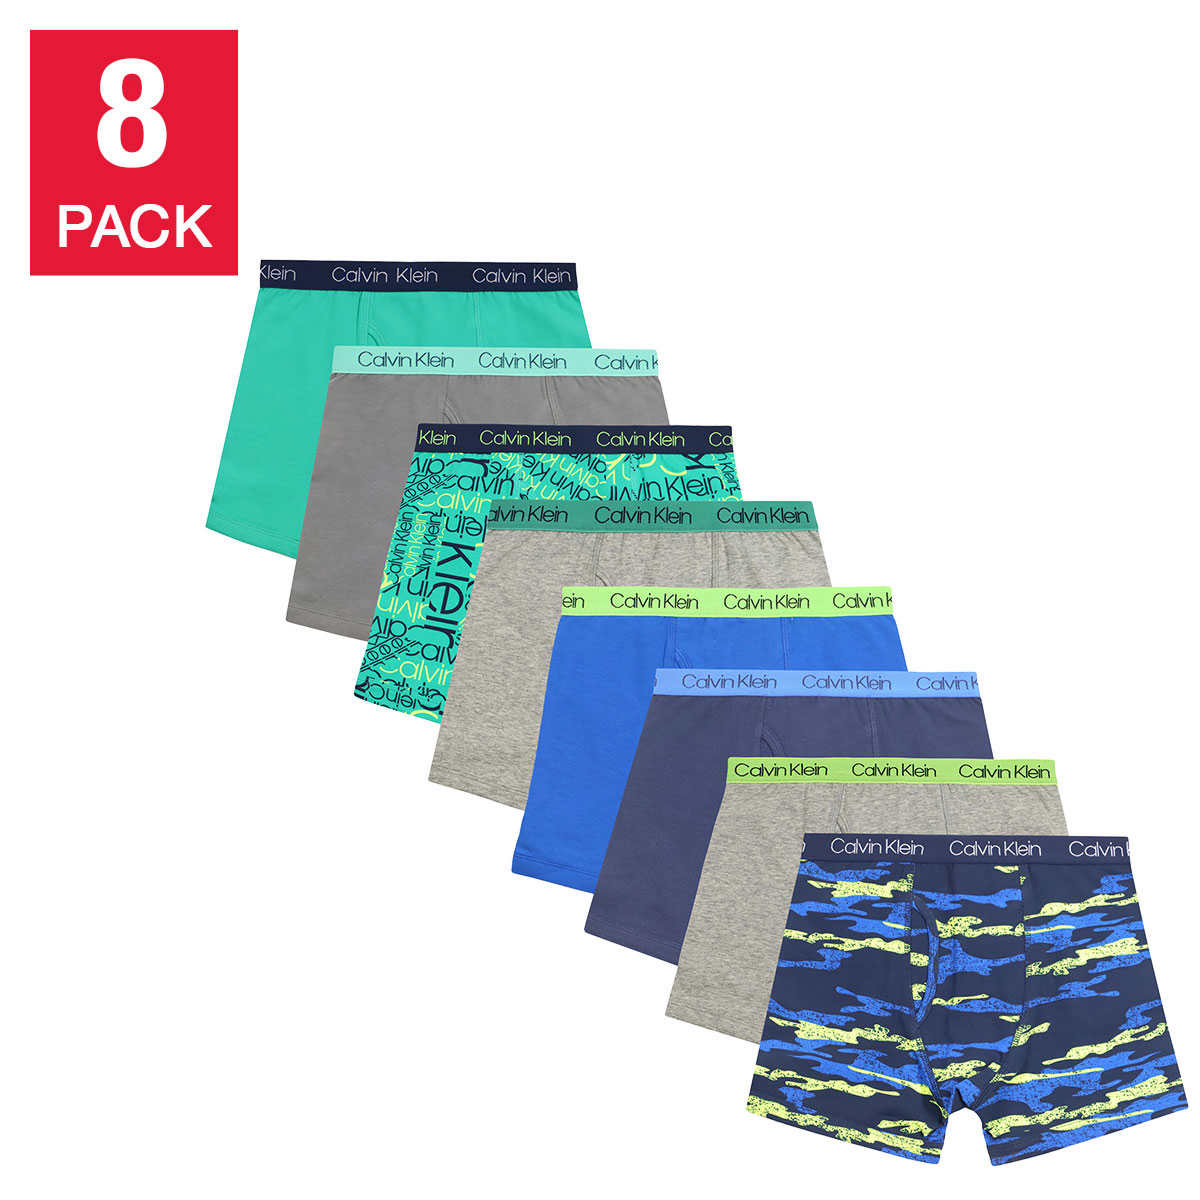 Costco Members: 8-Pack Calvin Klein Youth Boxer Brief (various colors)